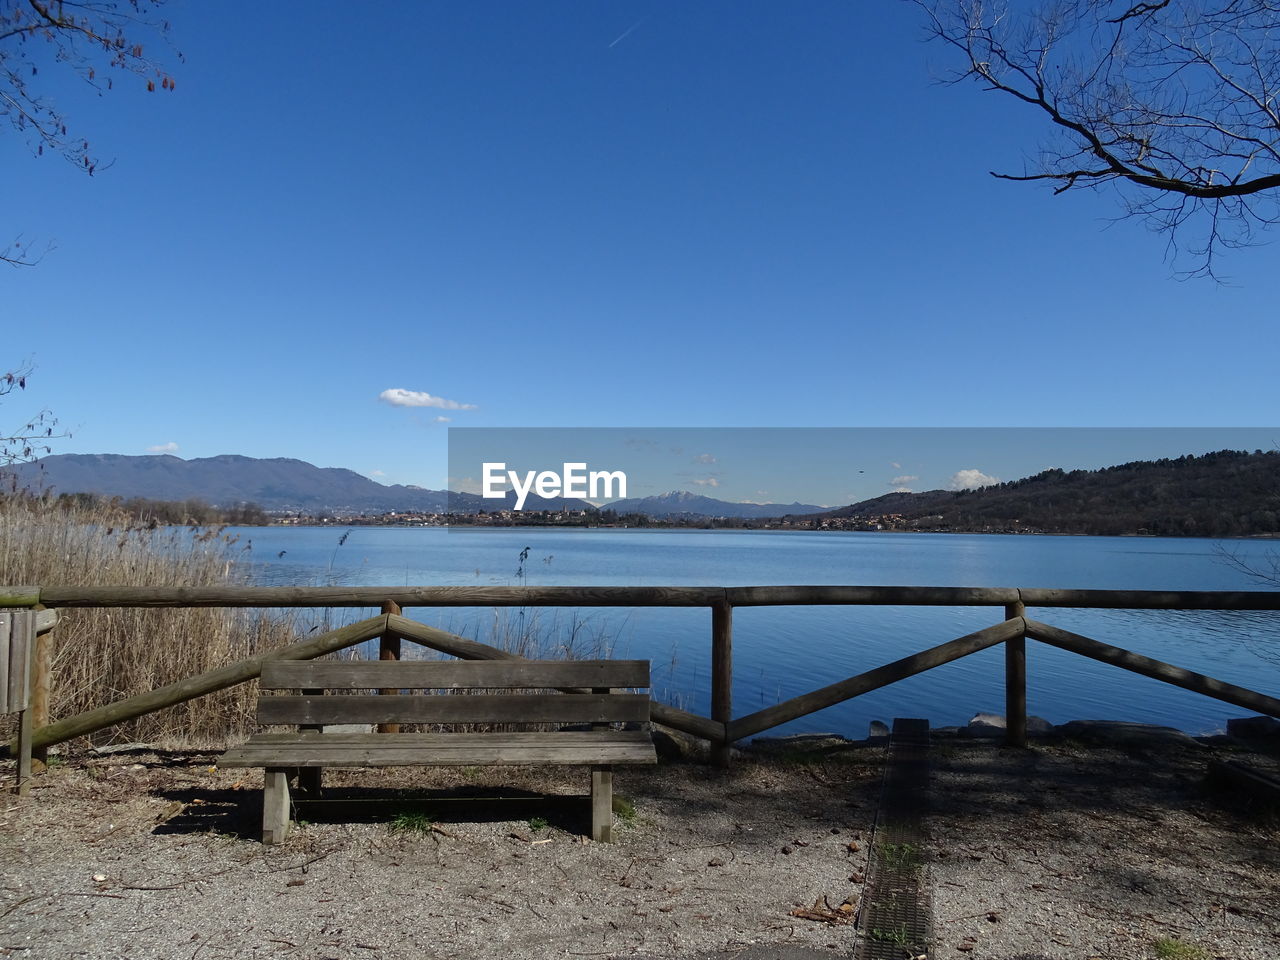 VIEW OF LAKE AGAINST CLEAR BLUE SKY